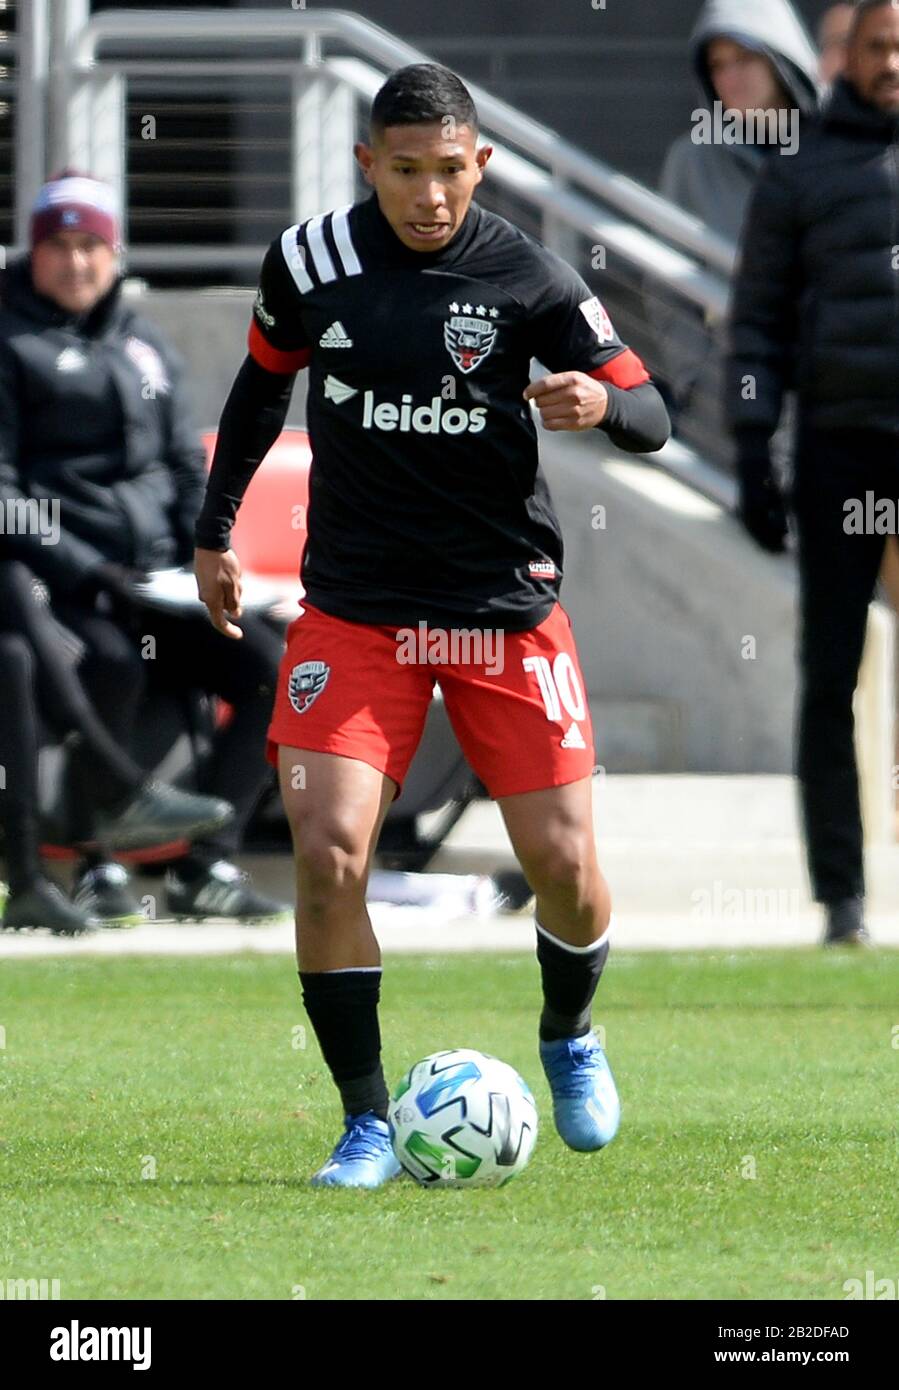 Washington, DC, USA. 29th Feb, 2020. 20200229 - D.C. United midfielder EDISON FLORES (10) advances the ball against the Colorado Rapids in the first half at Audi Field in Washington. Credit: Chuck Myers/ZUMA Wire/Alamy Live News Stock Photo